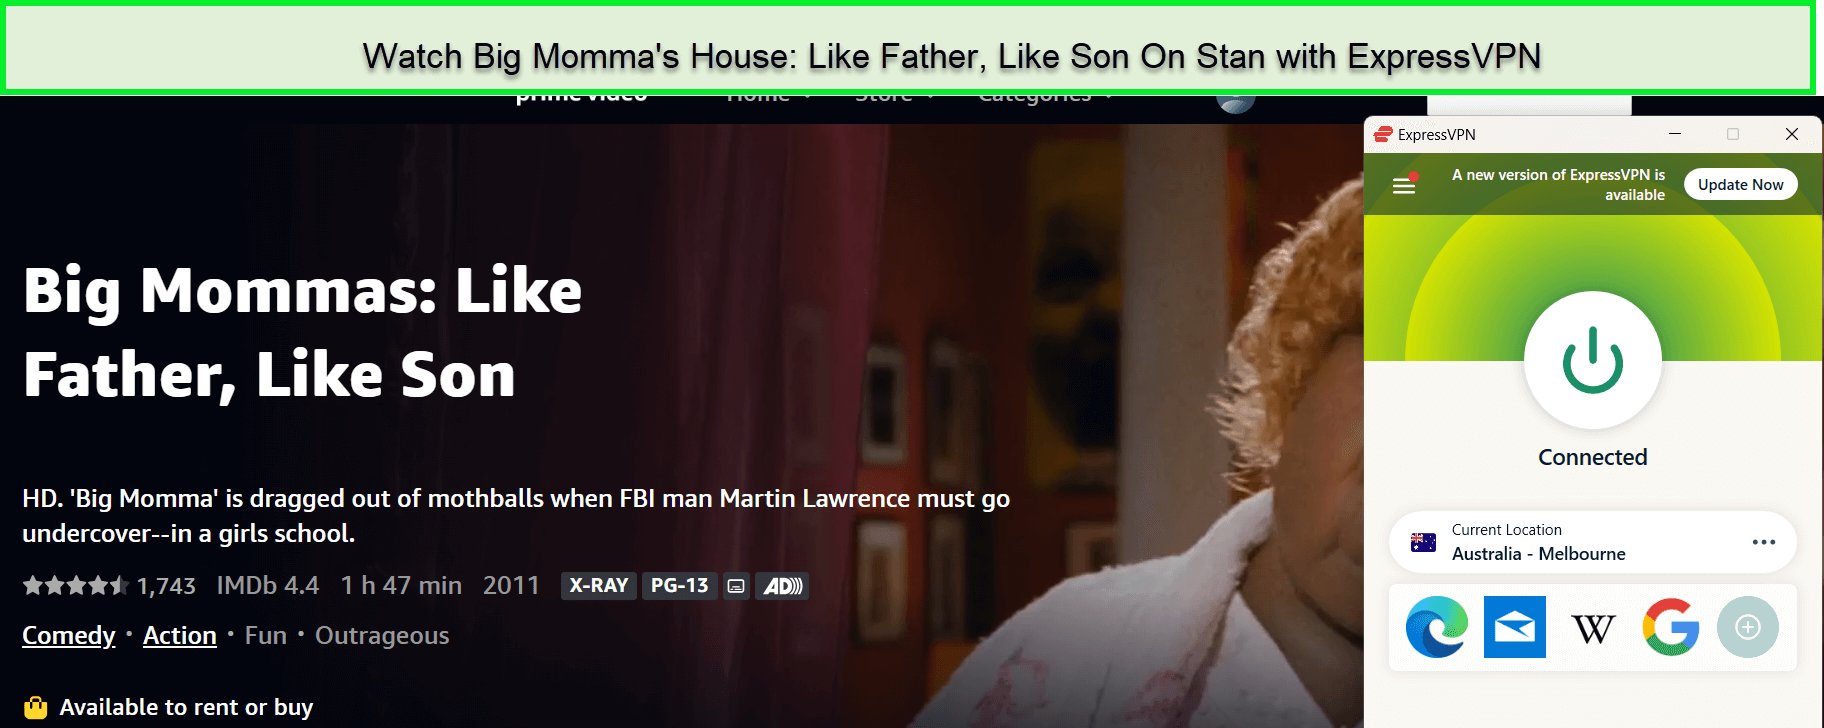 Watch Big Momma's House: Like Father, Like Son in-Spain On Stan